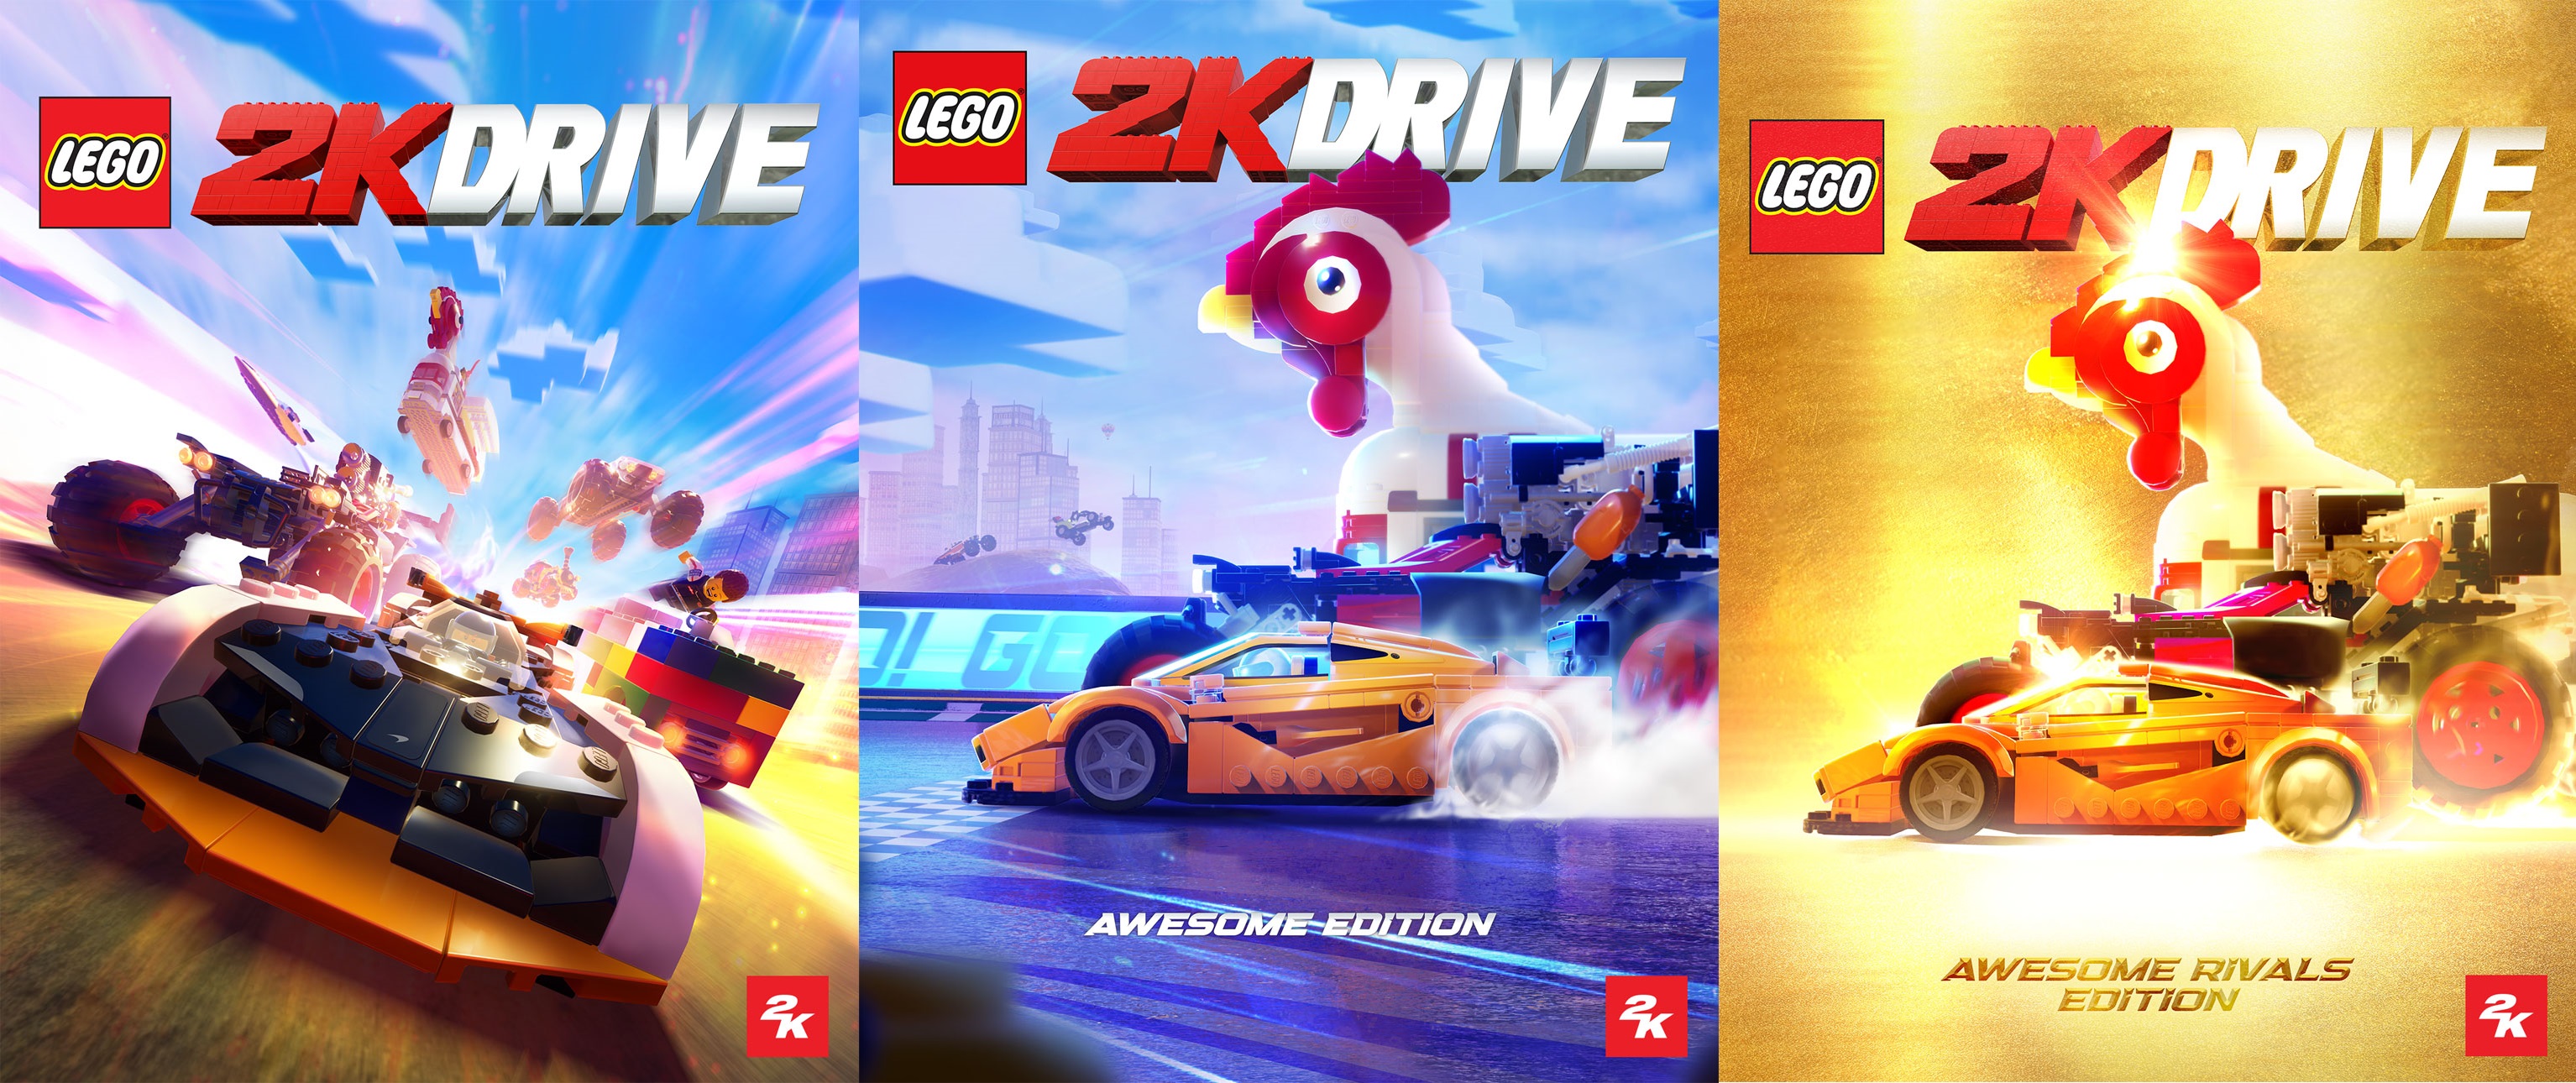 LEGO Fan 2K Brick Officially The Drive Announced -